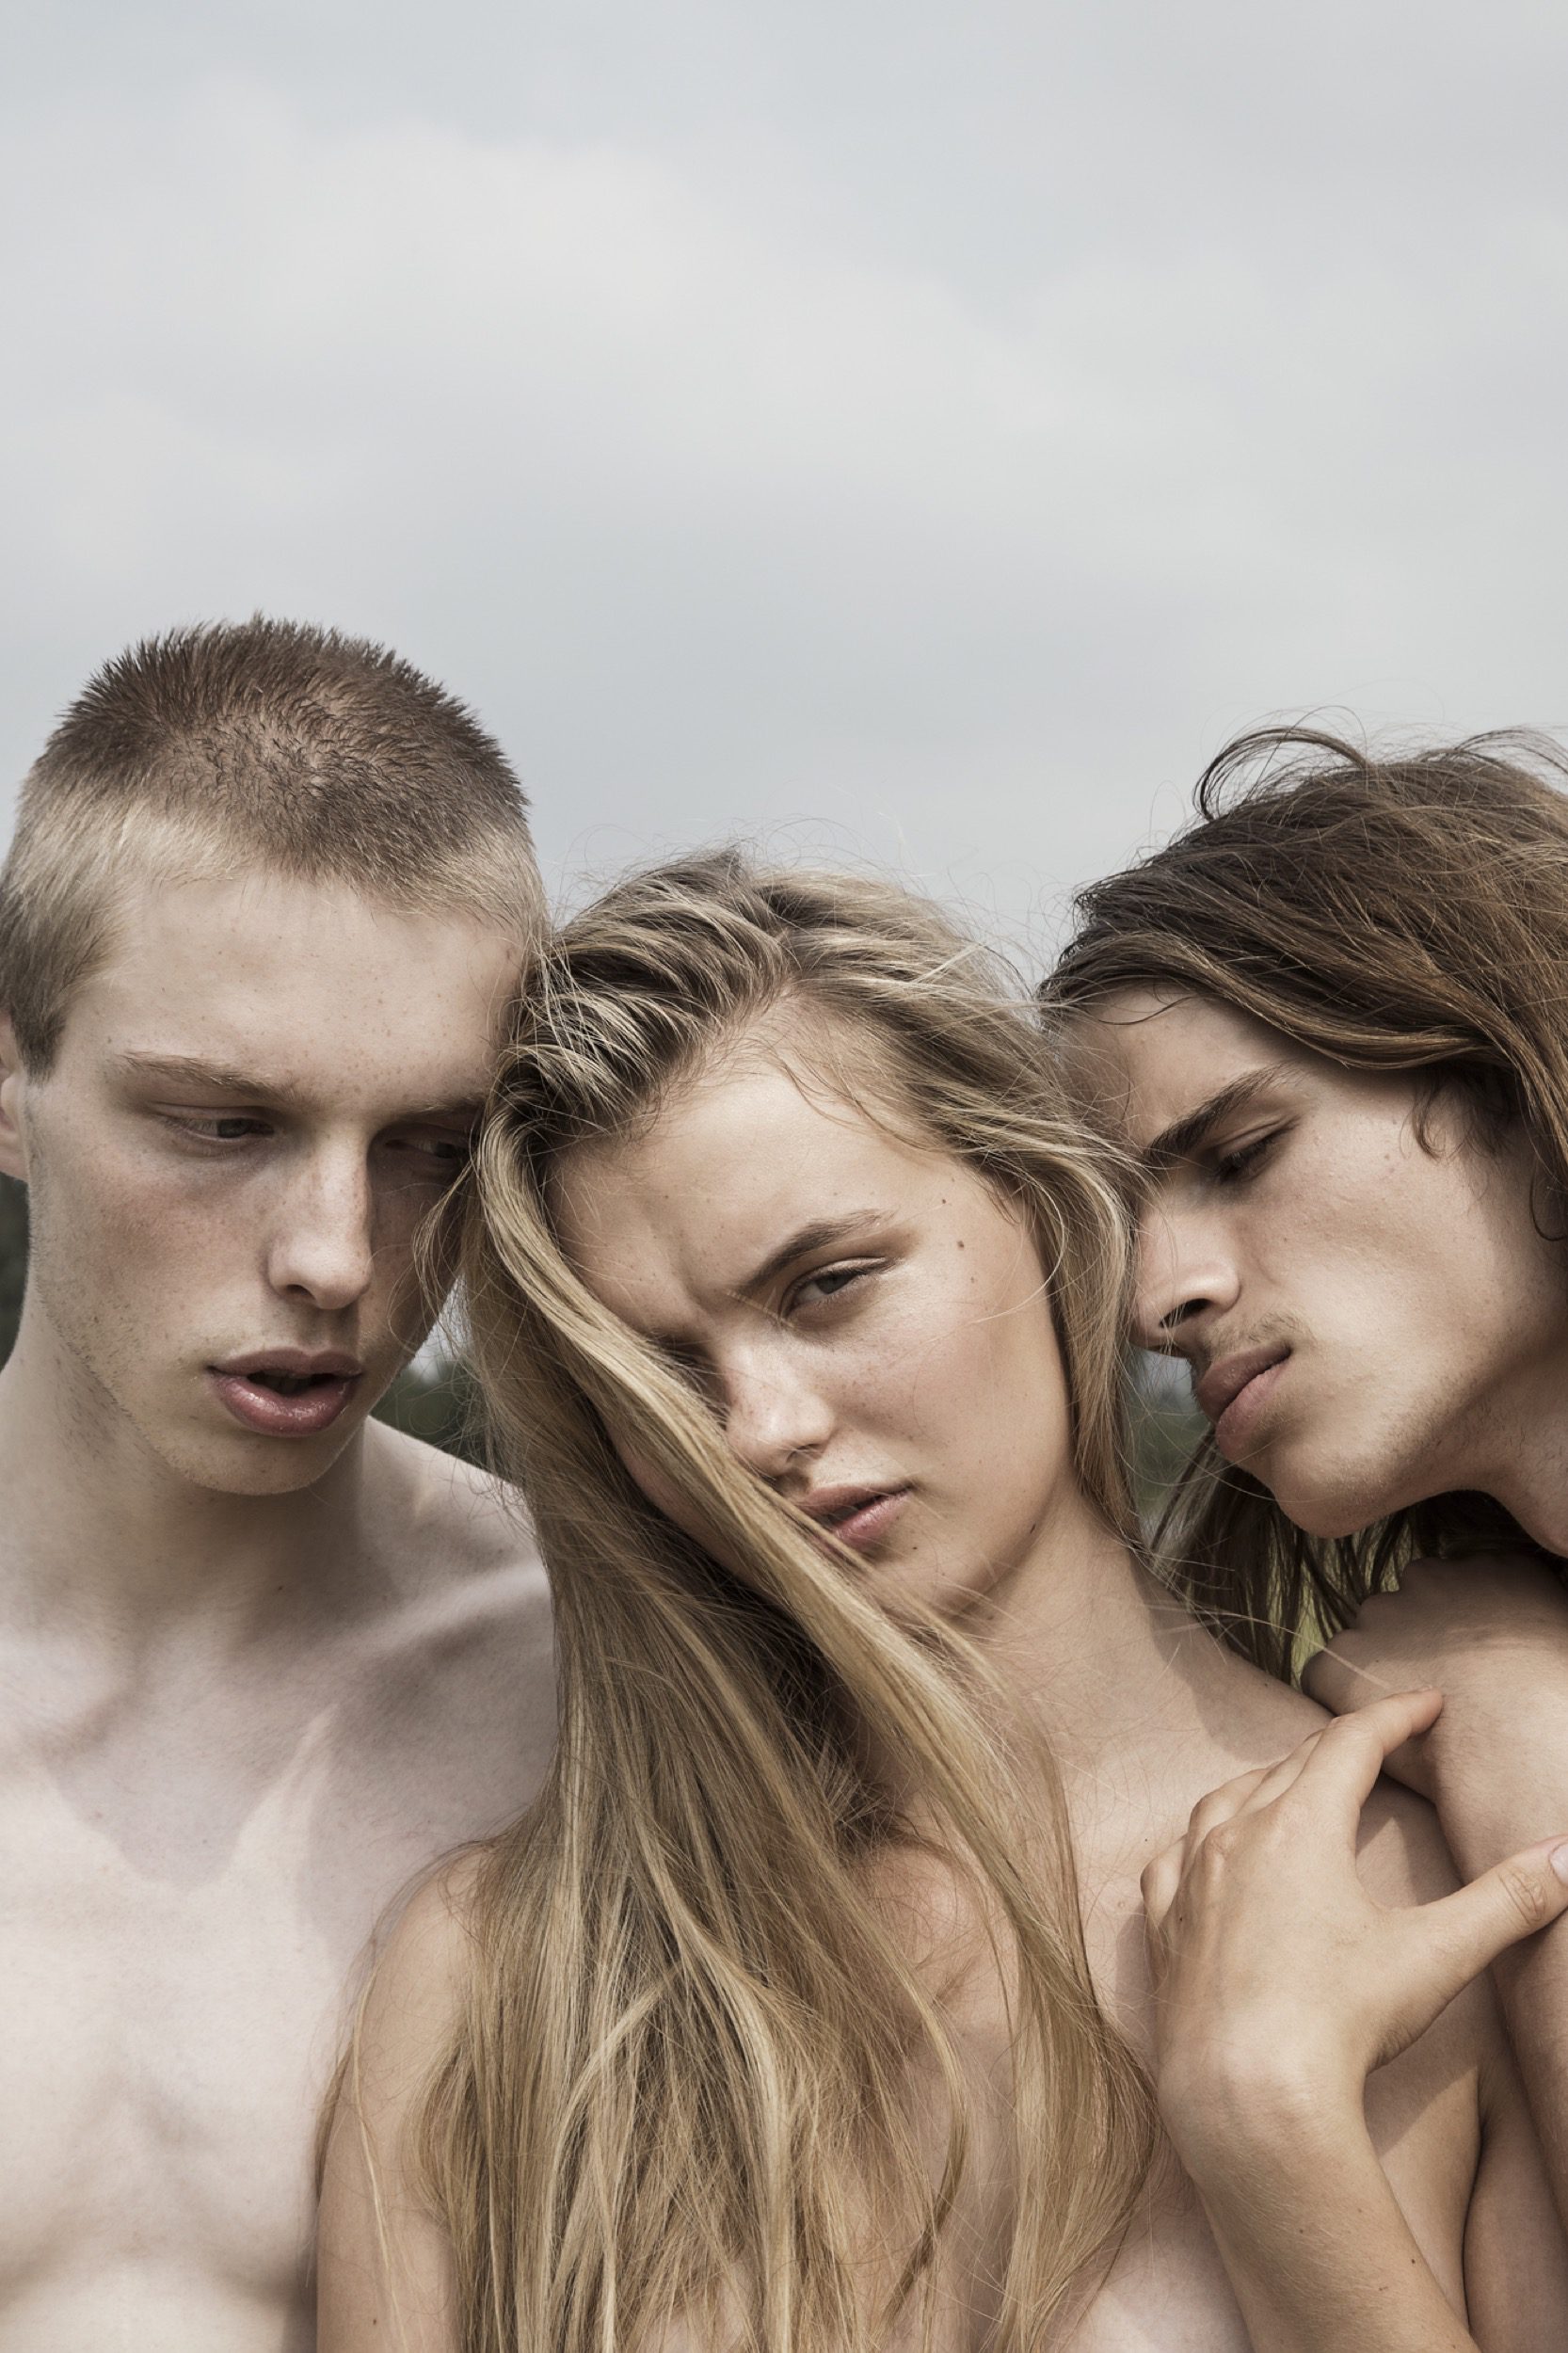 kathrin-hohberg-c-heads-mag-doped-youth-niels-bruchmann-10